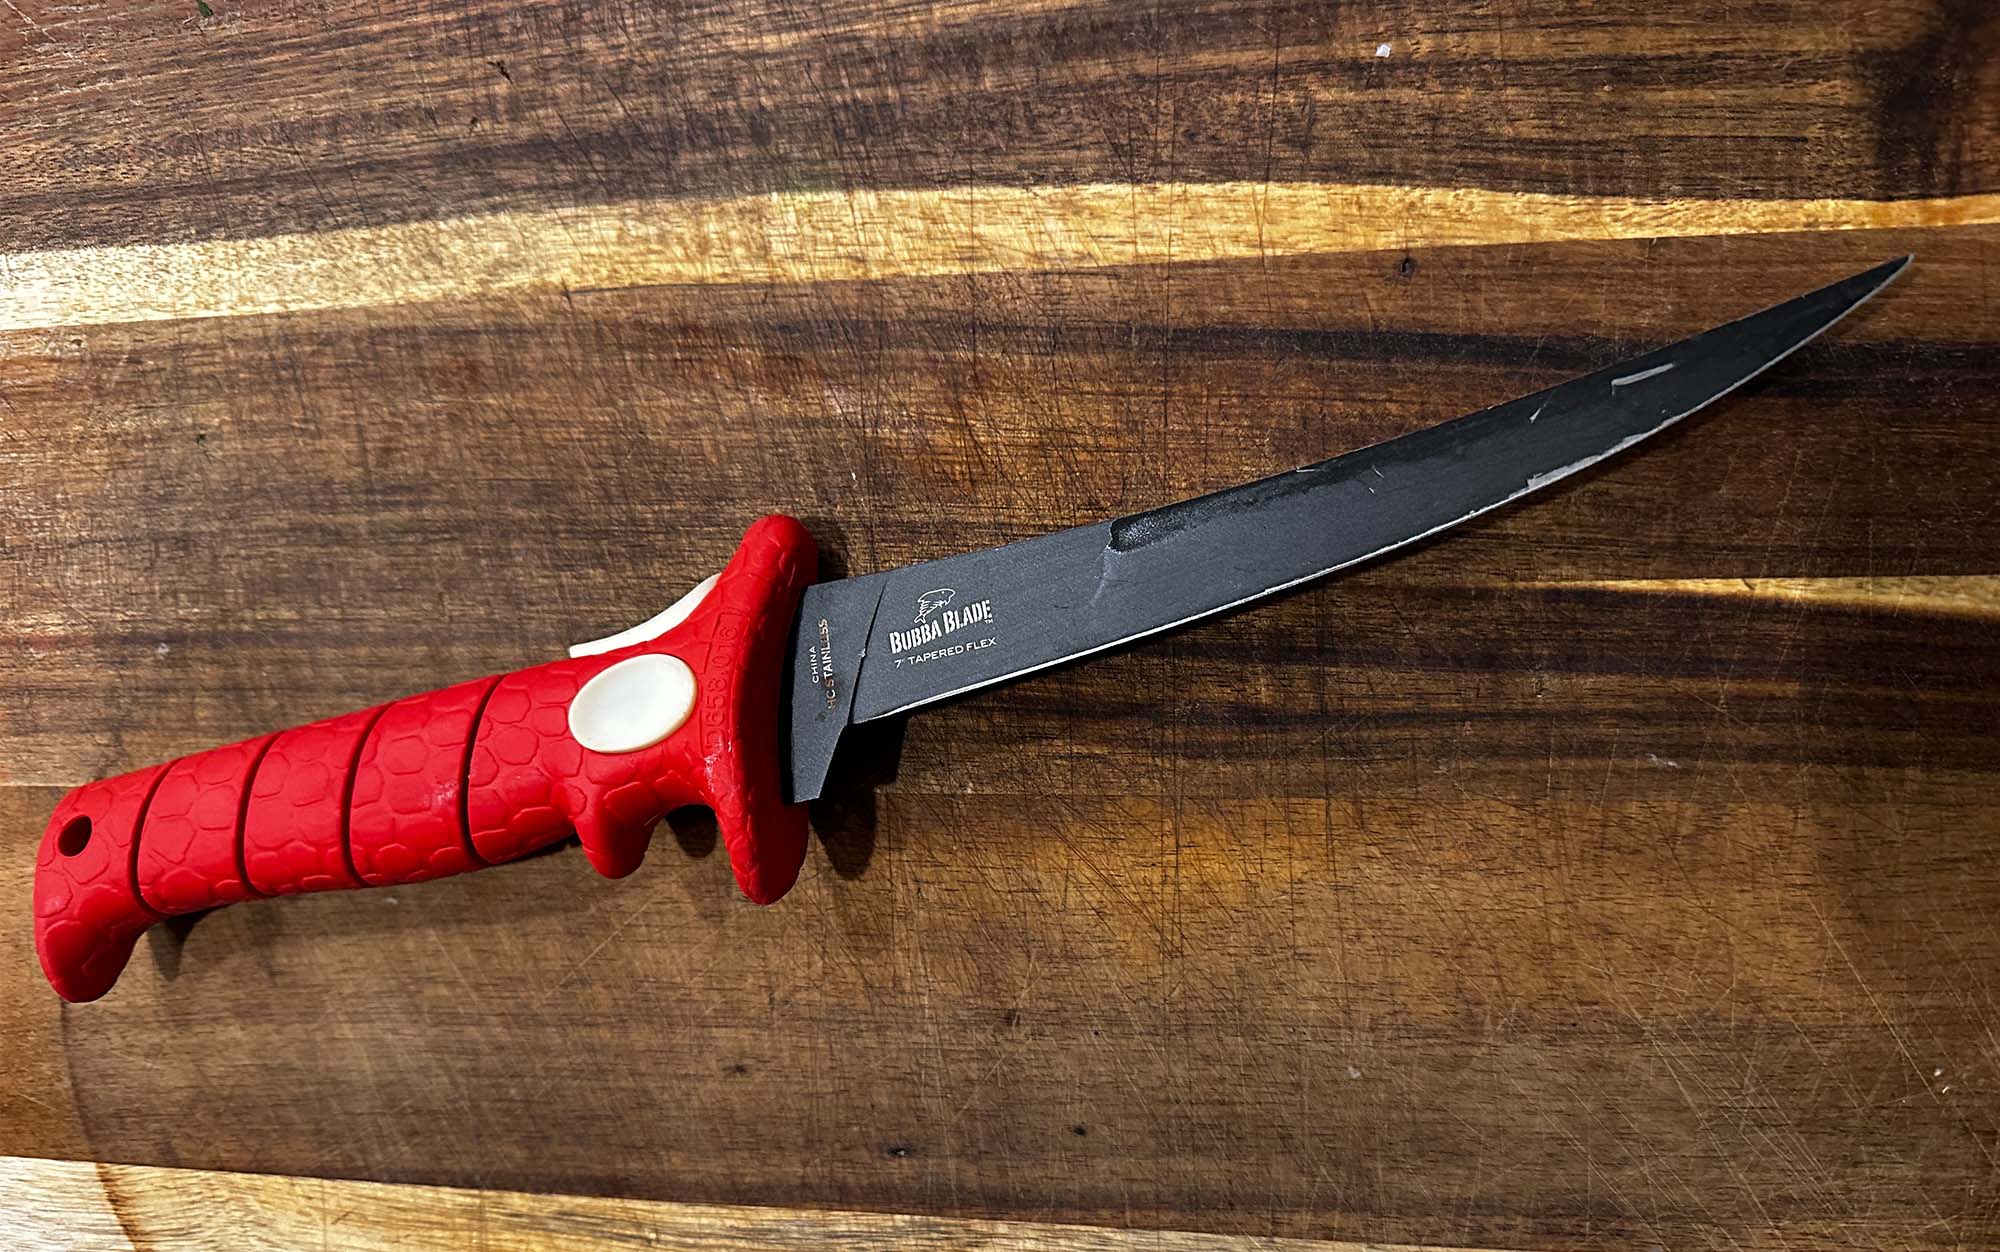 The Best Knife Sharpeners for Hunting - Petersen's Hunting